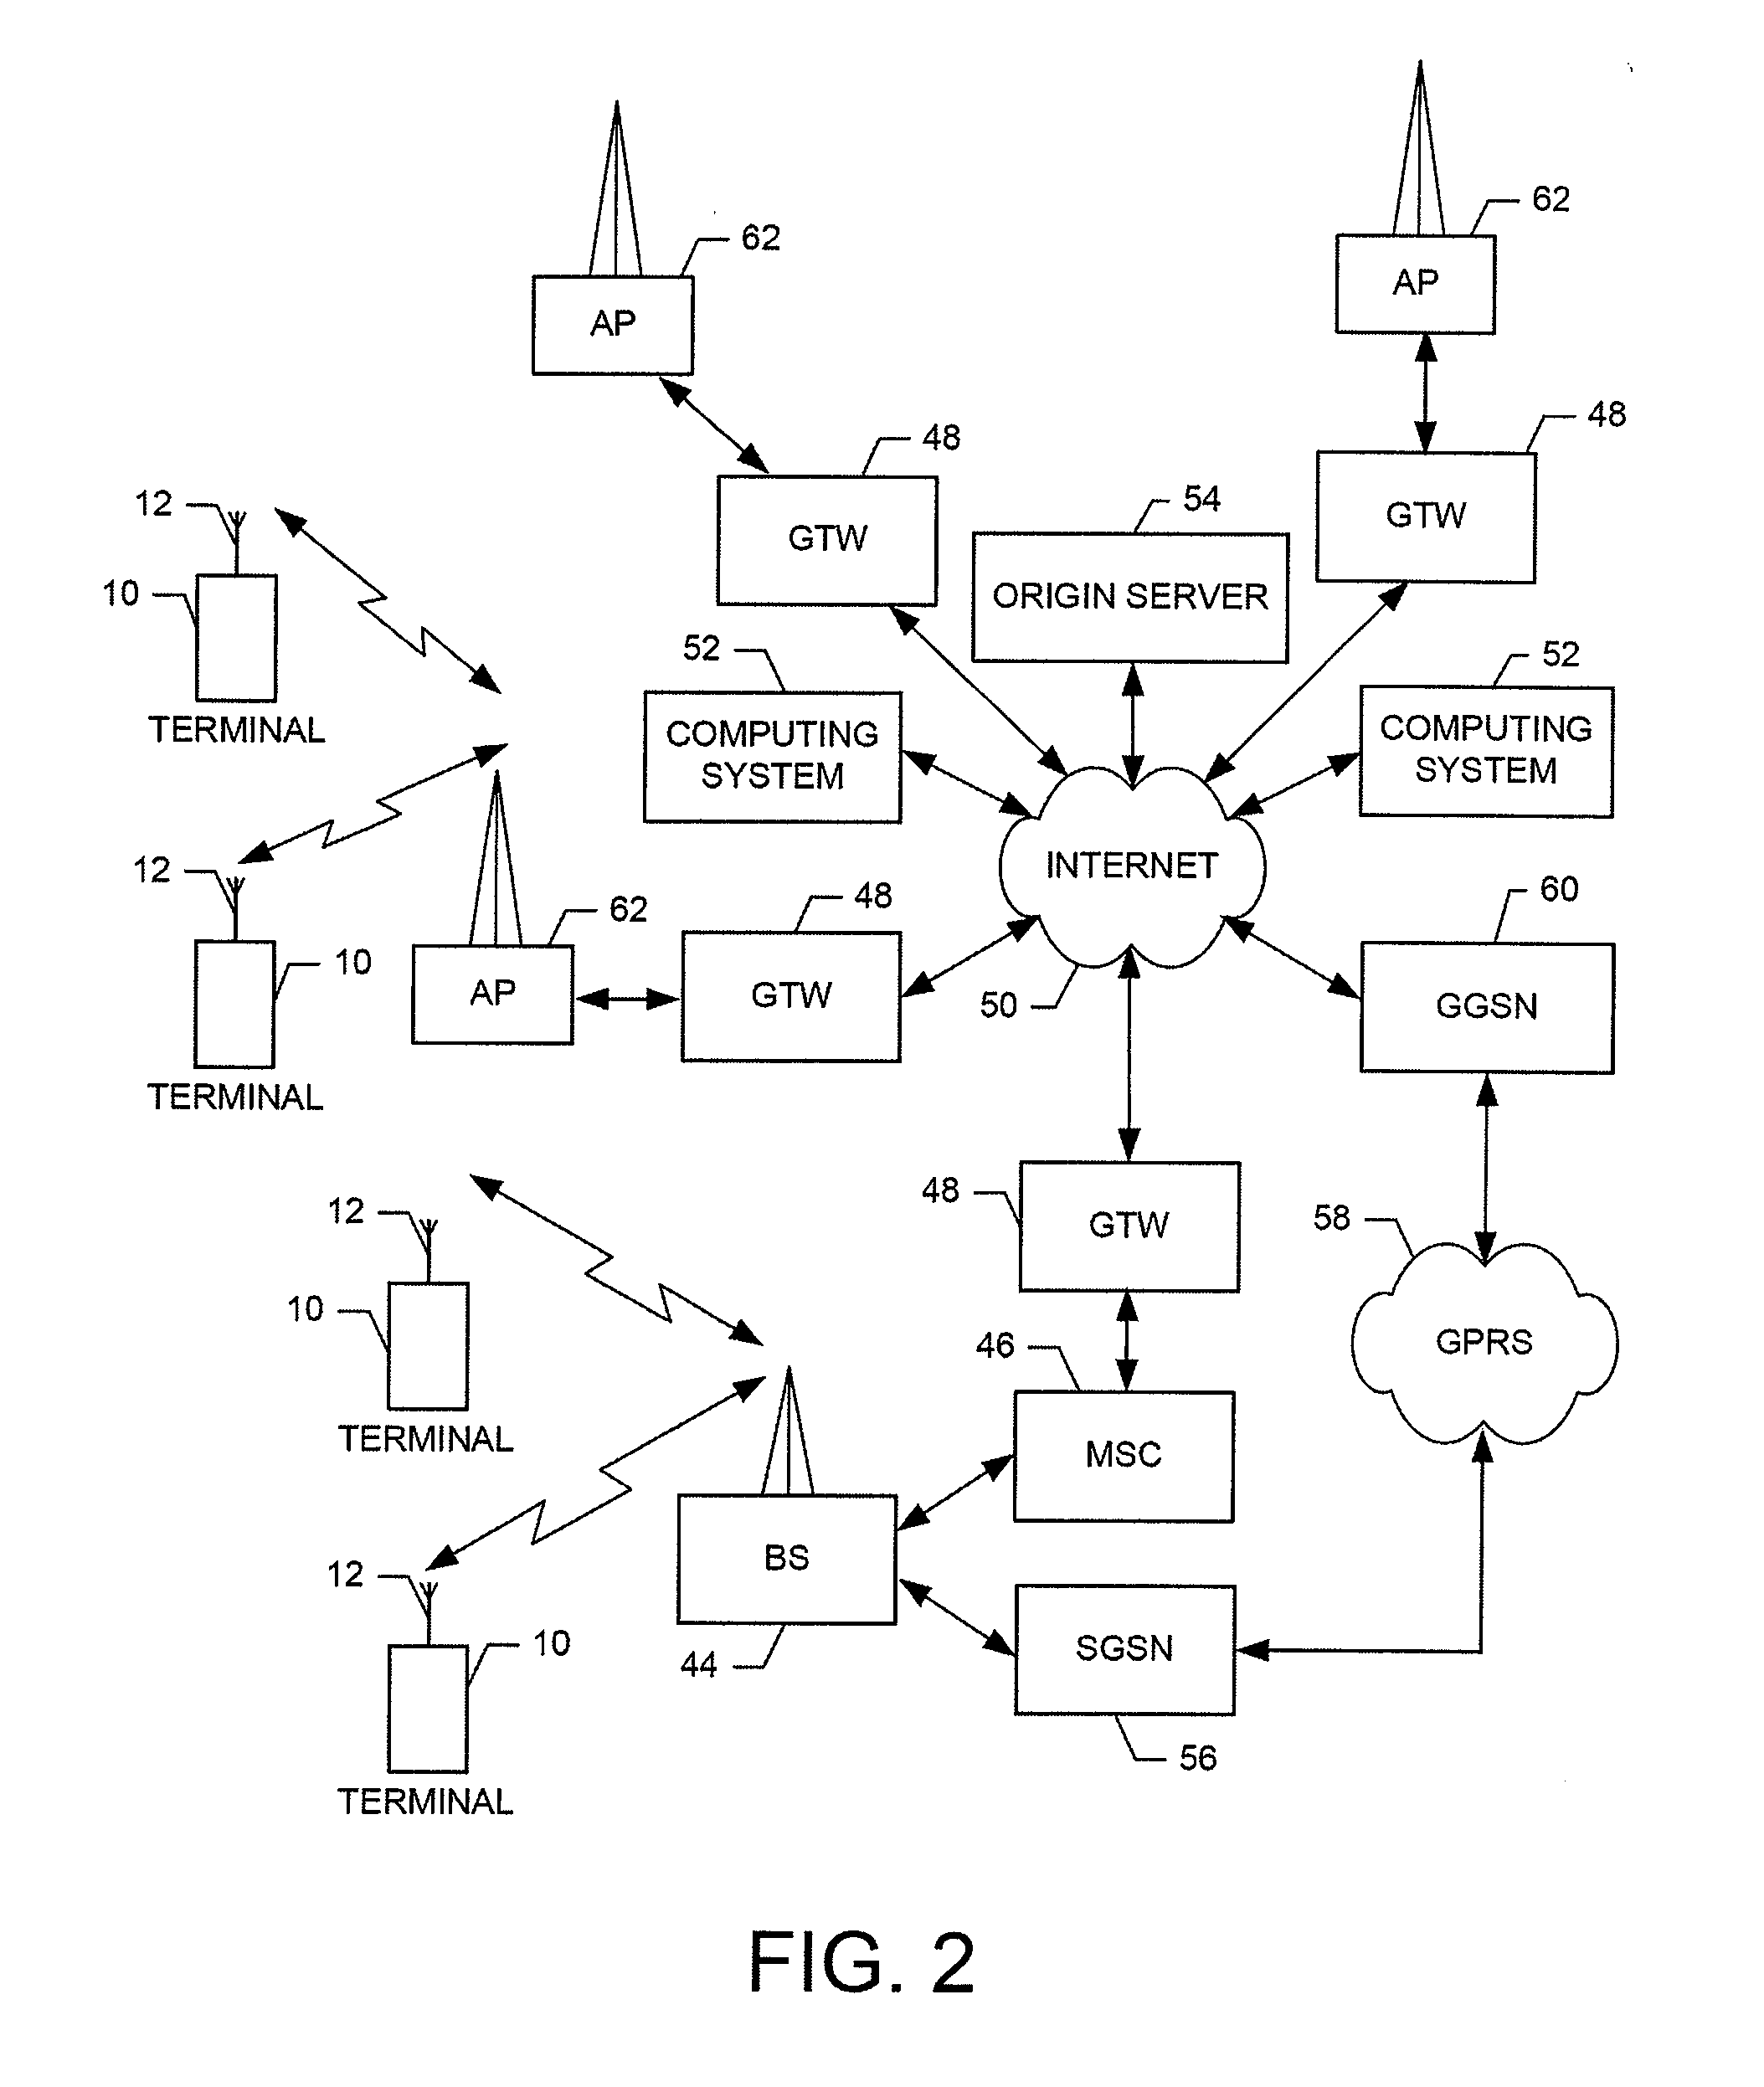 Method, Apparatus and Computer Program Product for Providing Route Planning Based on Personal Activity Plans of Multiple Individuals